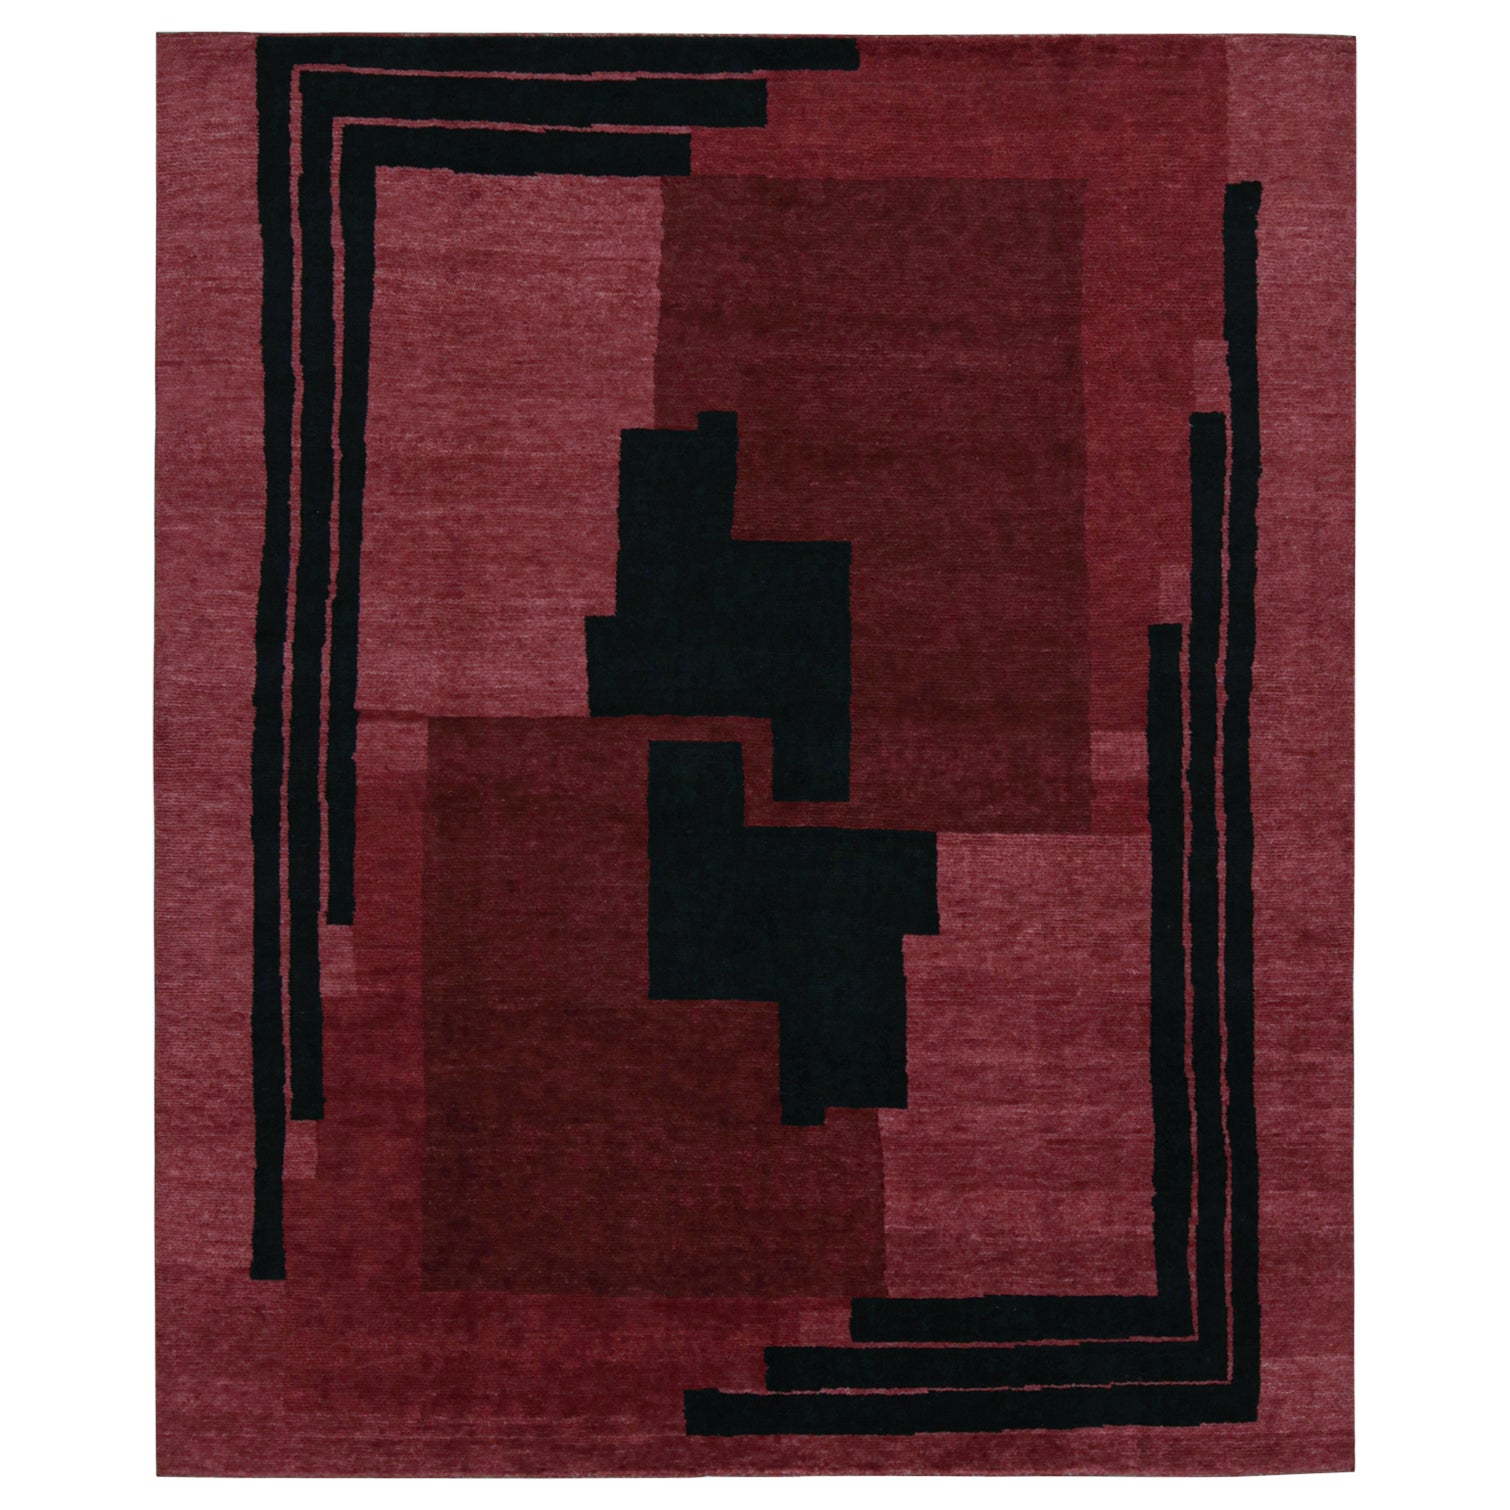 Rug & Kilim’s French Art Deco style rug in Red with Black Geometric Patterns